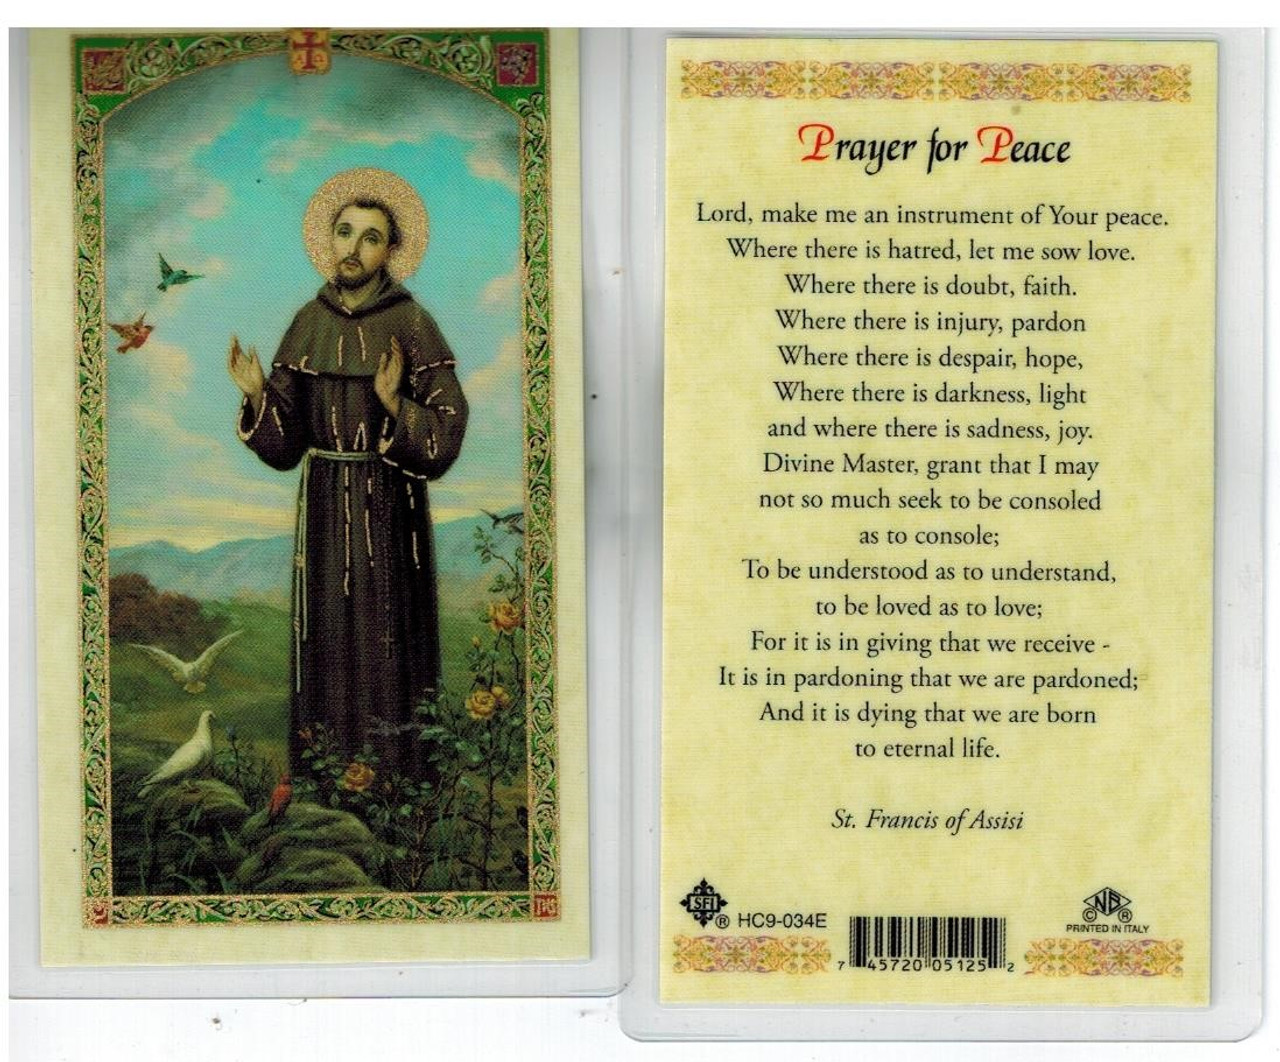 Laminated Prayer Card of St Francis “Prayer for Peace”
